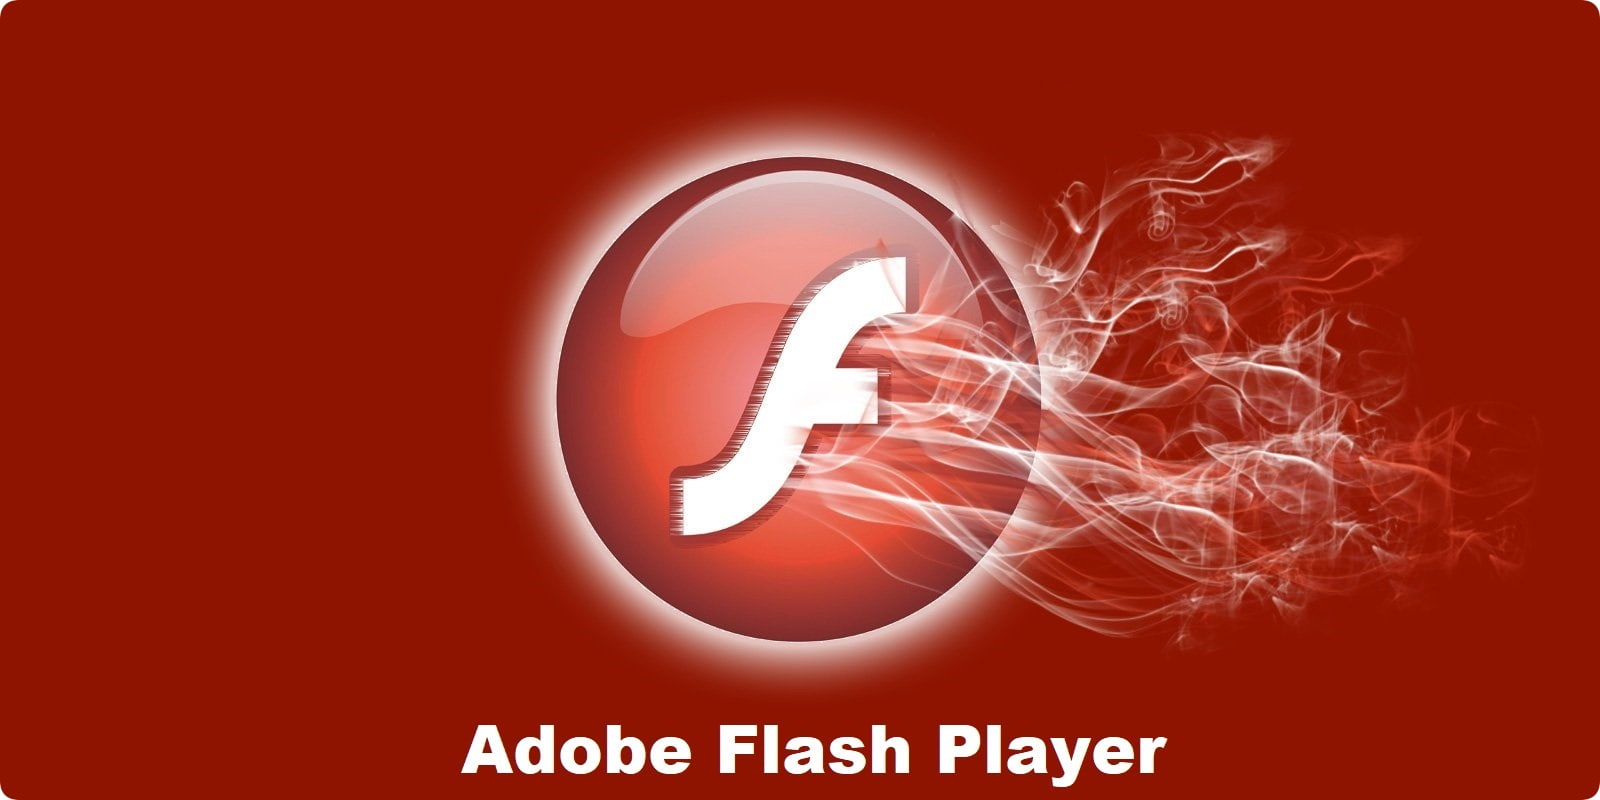 is there an alternative to adobe flash player for firefox